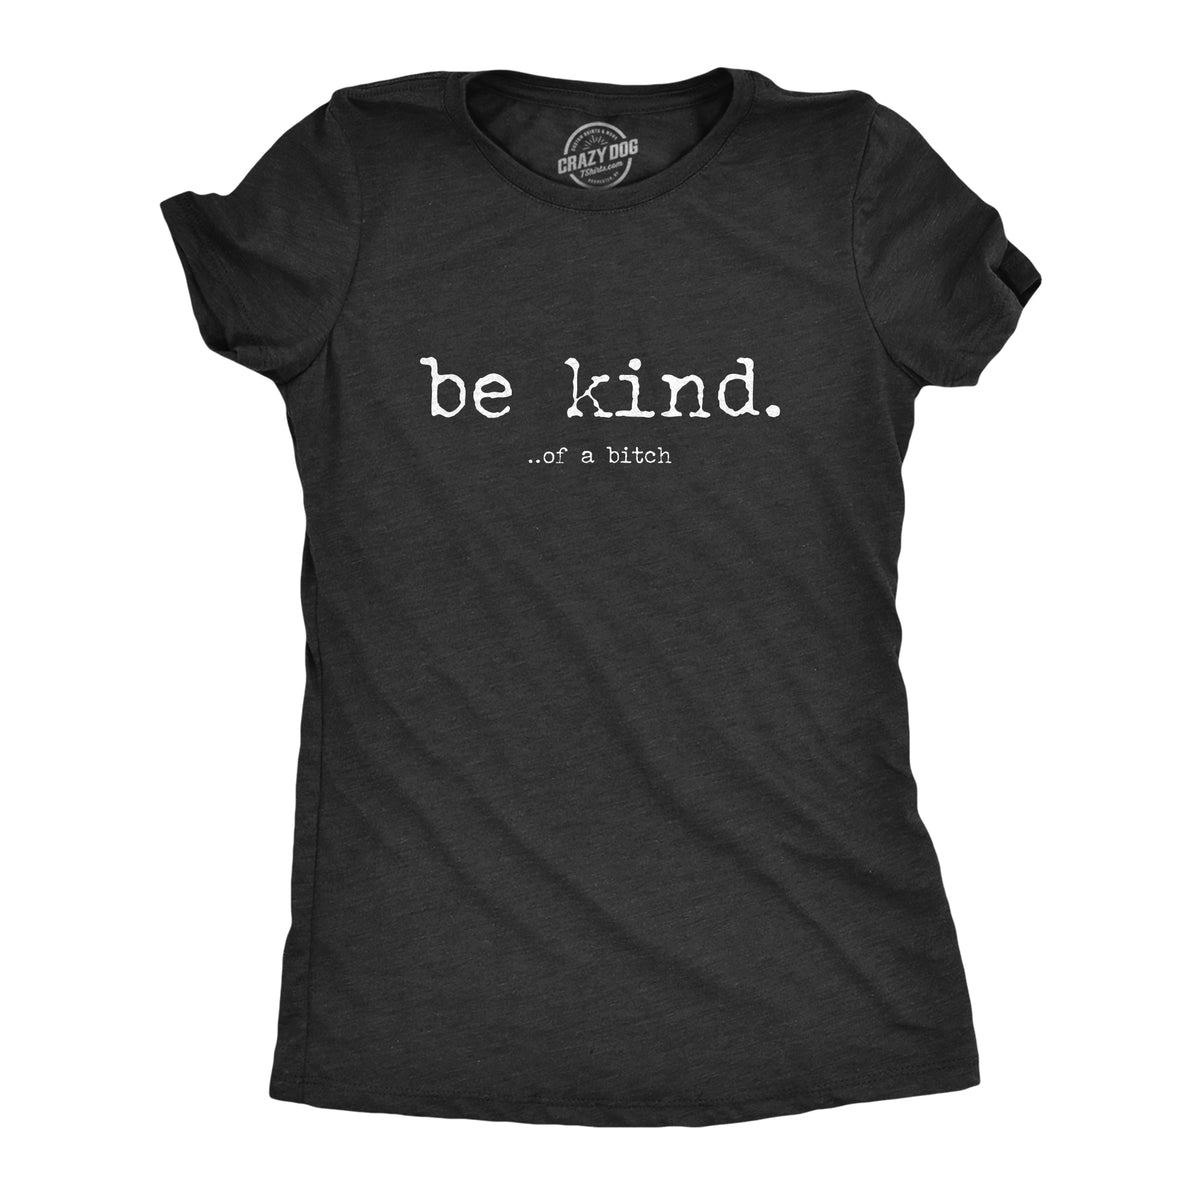 Funny Heather Black - Be Kind Be Kind Of A Bitch Womens T Shirt Nerdy Sarcastic Tee